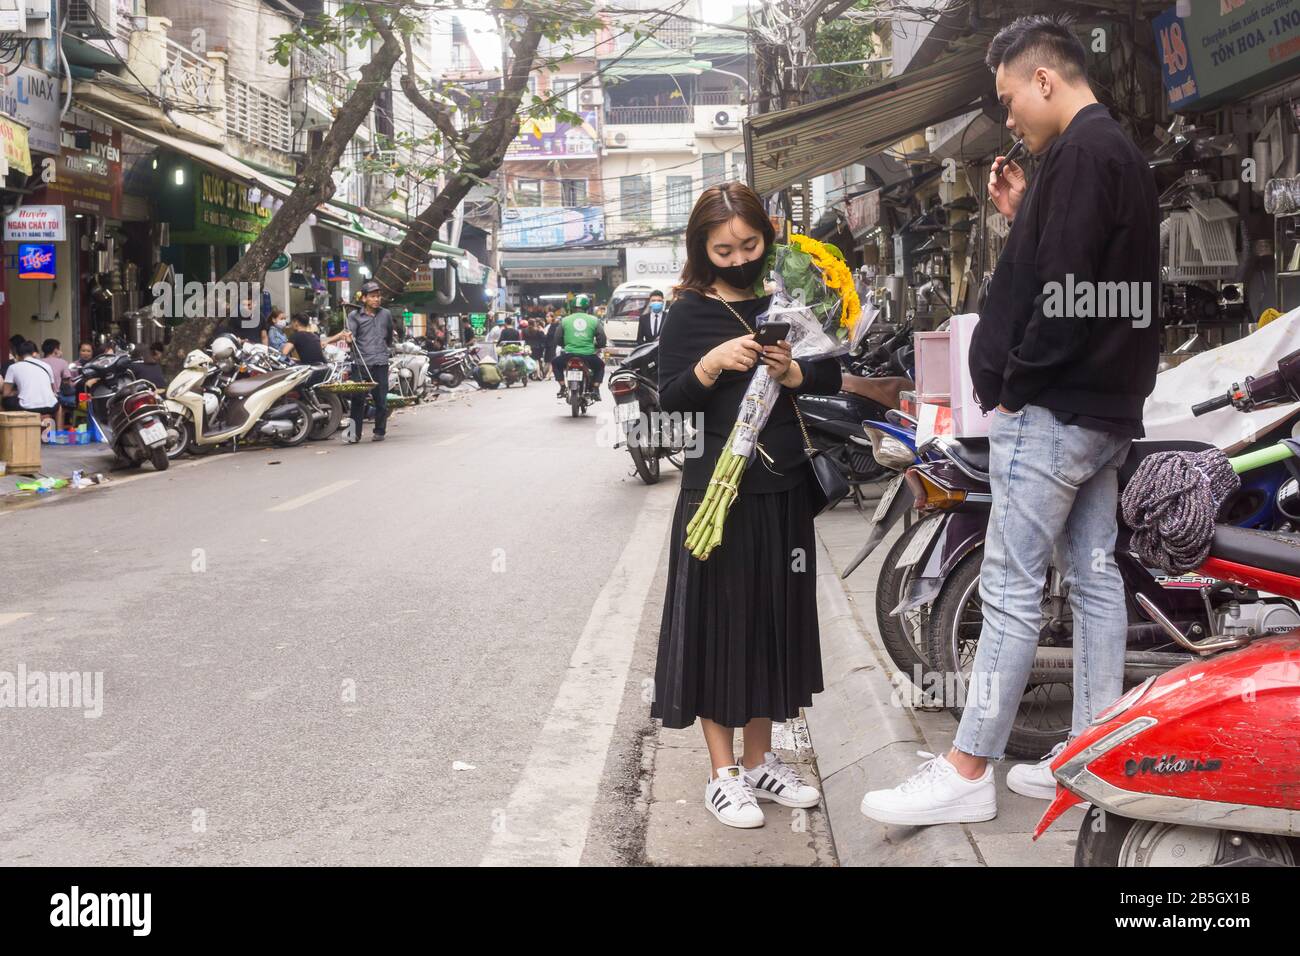 Hanoi street scene - Two Vietnamese people in their 20s chatting on the street of the Old Quarter in Hanoi, Vietnam, Southeast Asia. Stock Photo